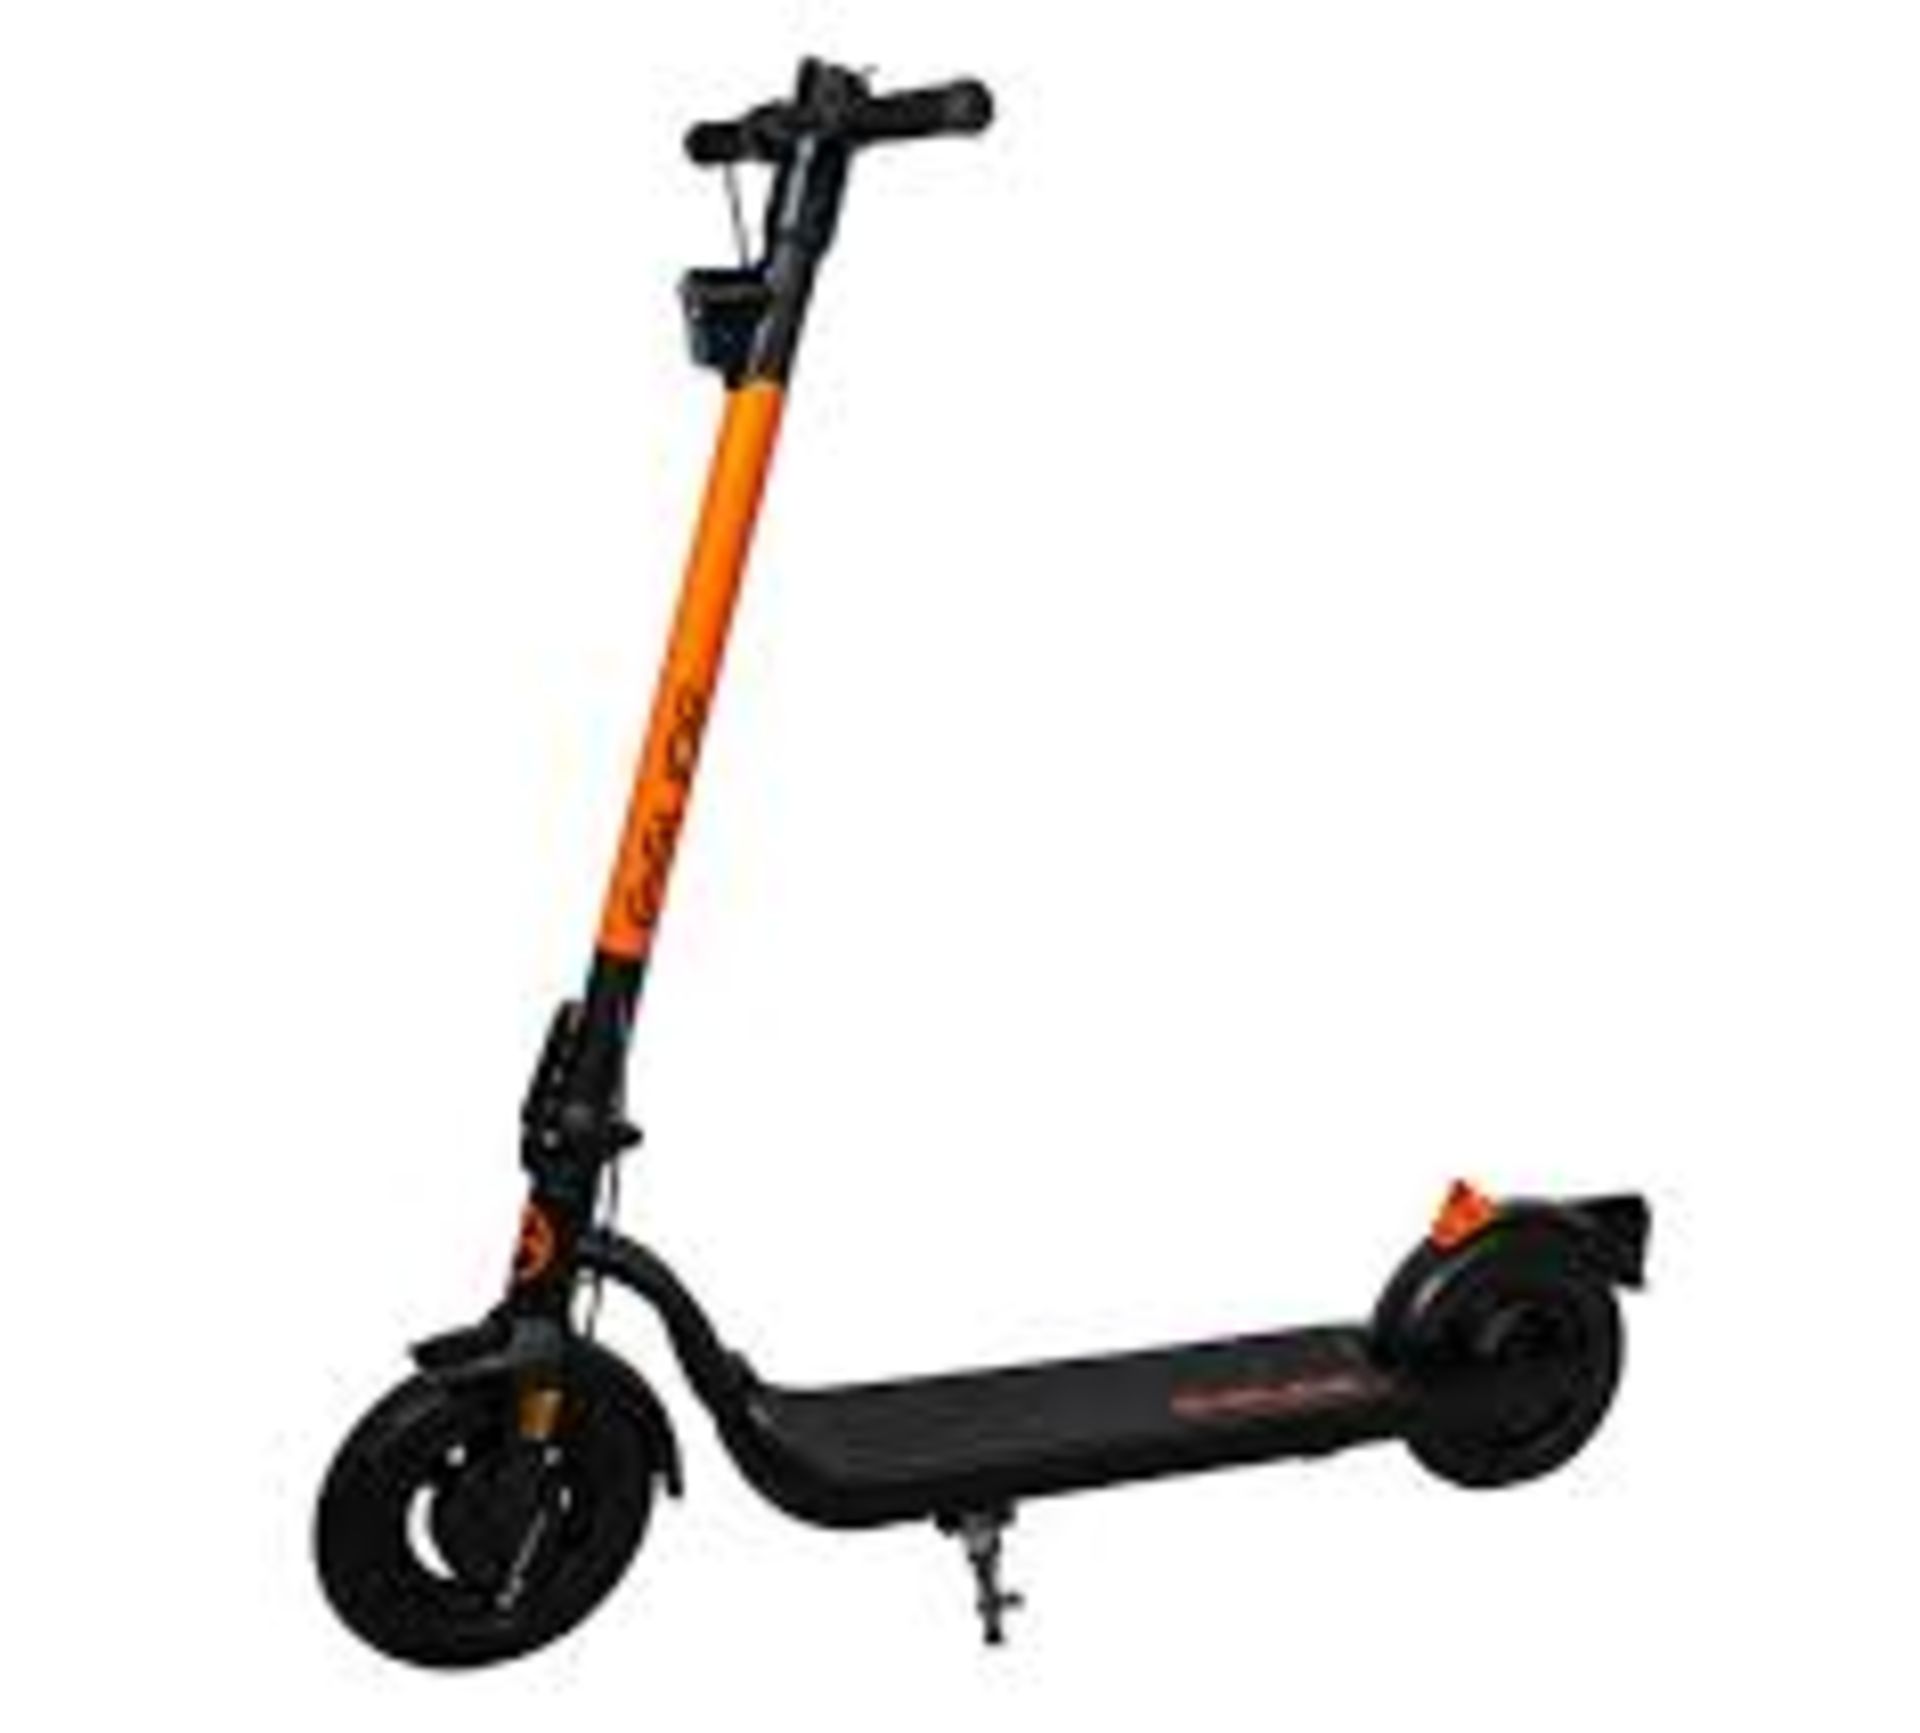 Brand New E-Glide V2 Electric Scooter Orange and Black RRP £599, Introducing a sleek and efficient - Image 3 of 3